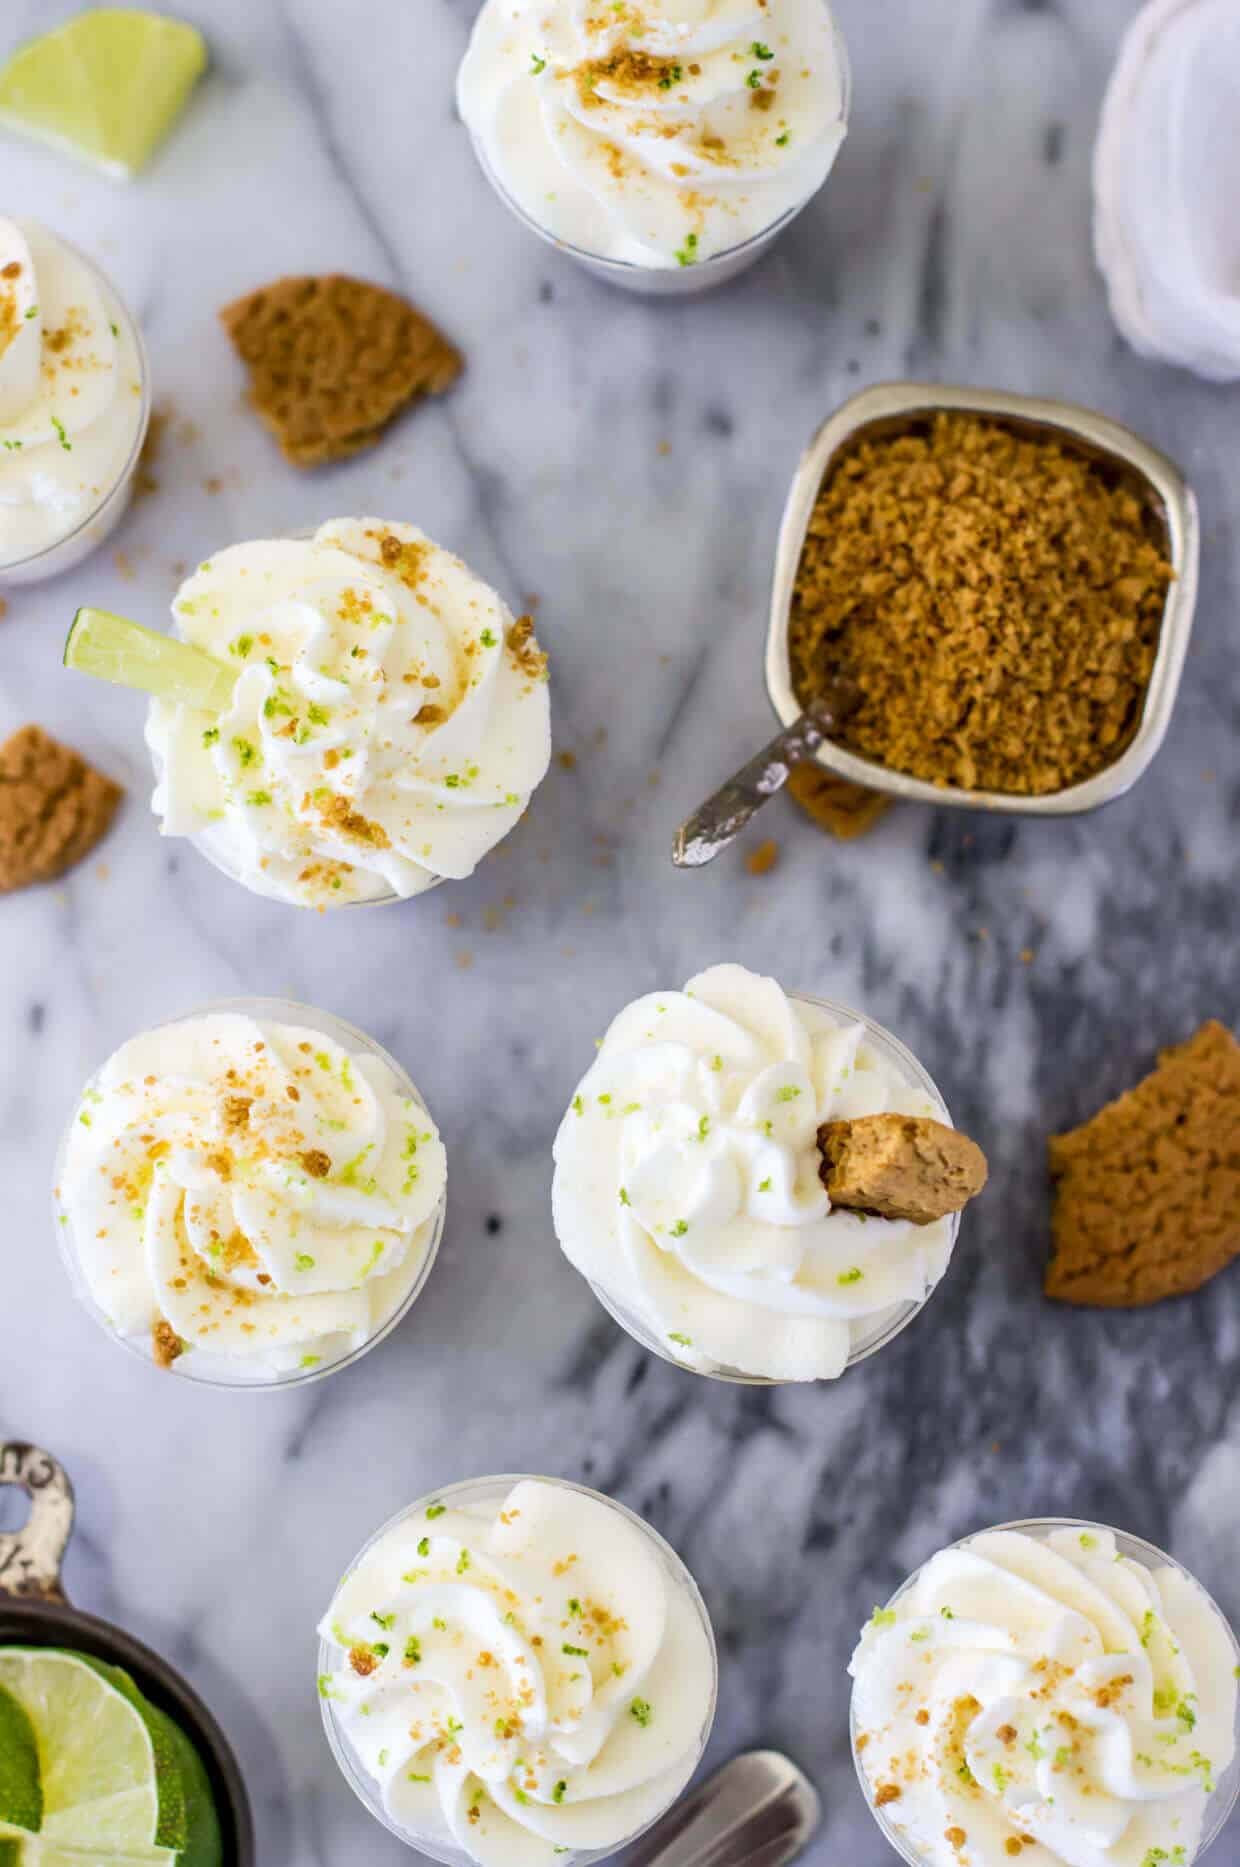 Key Lime Pie Dessert Shooters with gingersnap crust